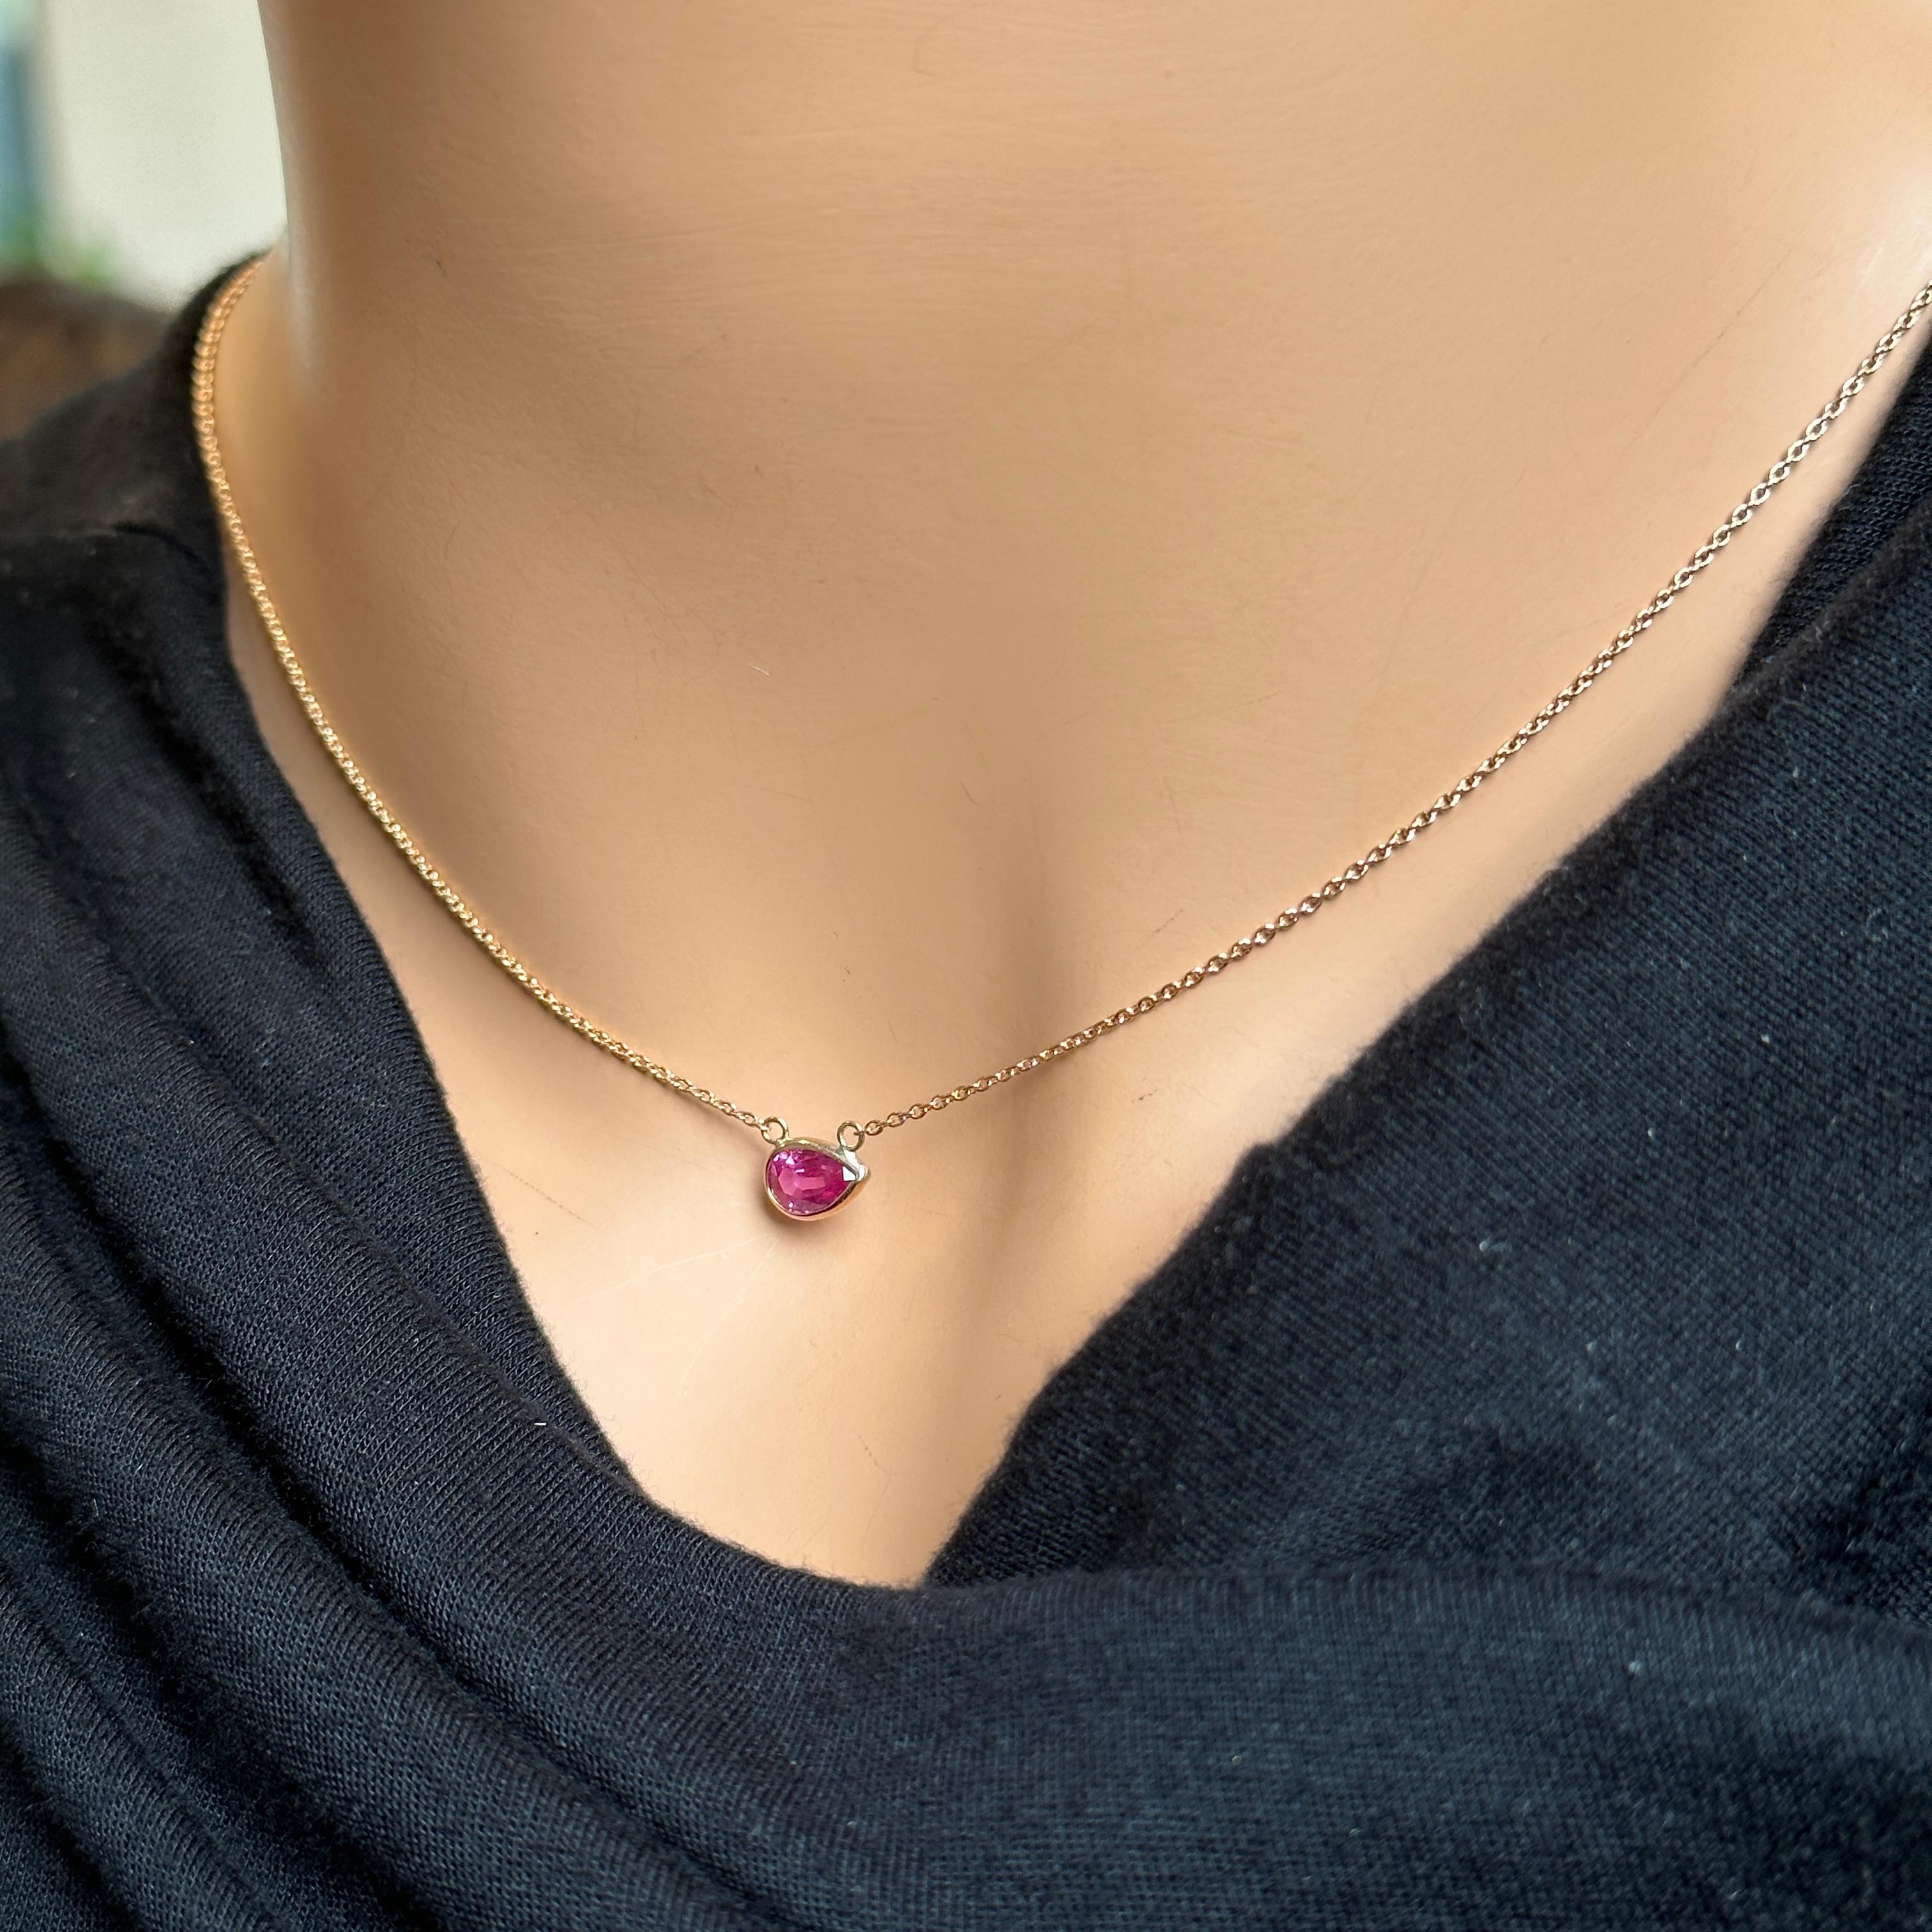 1.17 Ct Certified Pink Sapphire Pear Cut Solitaire Necklace in 14k RG In New Condition For Sale In Chicago, IL